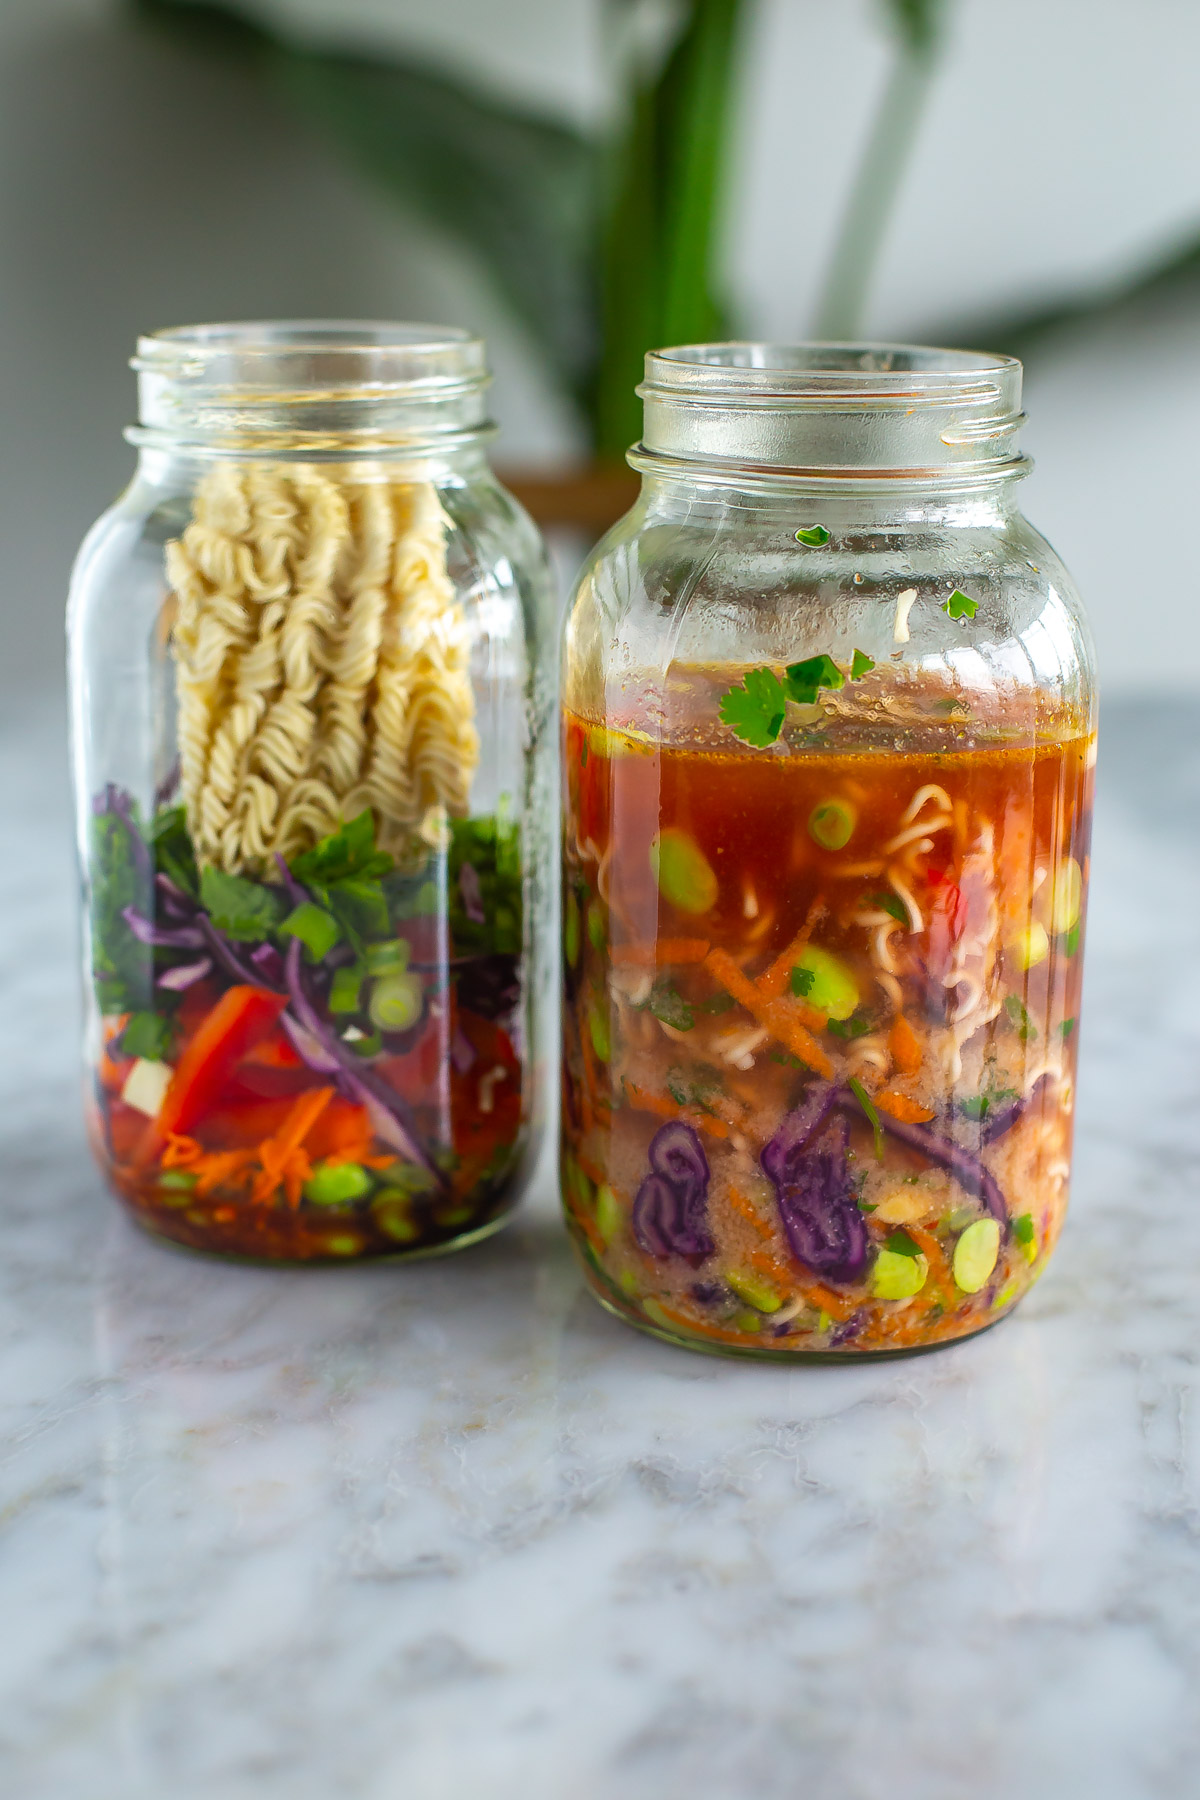 Two DIY instant noodle mason jars, one with water inside.